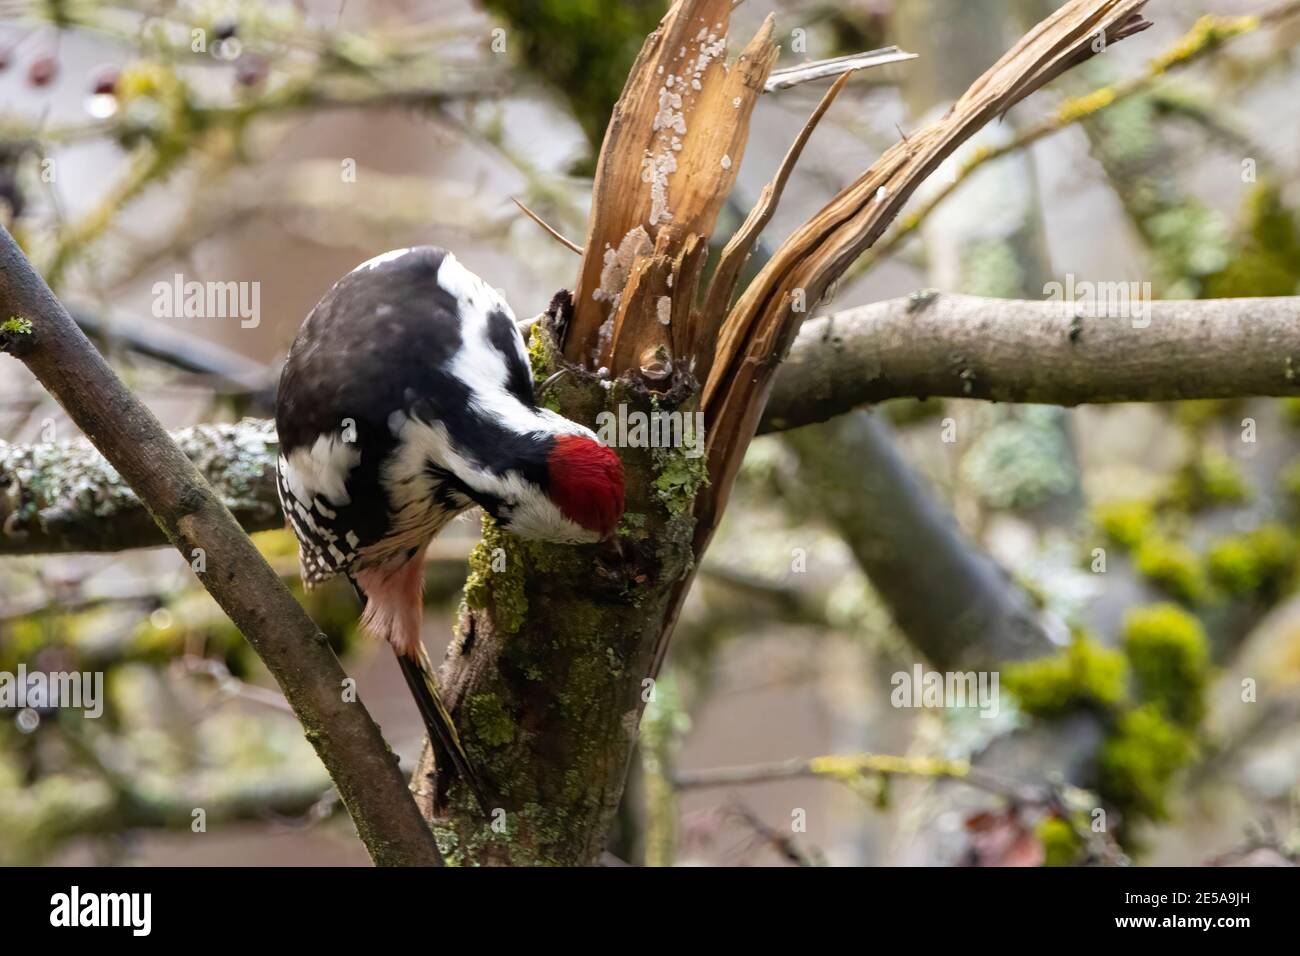 A woodpecker in a little forest next to the Mönchbruch pond looking for food. Stock Photo